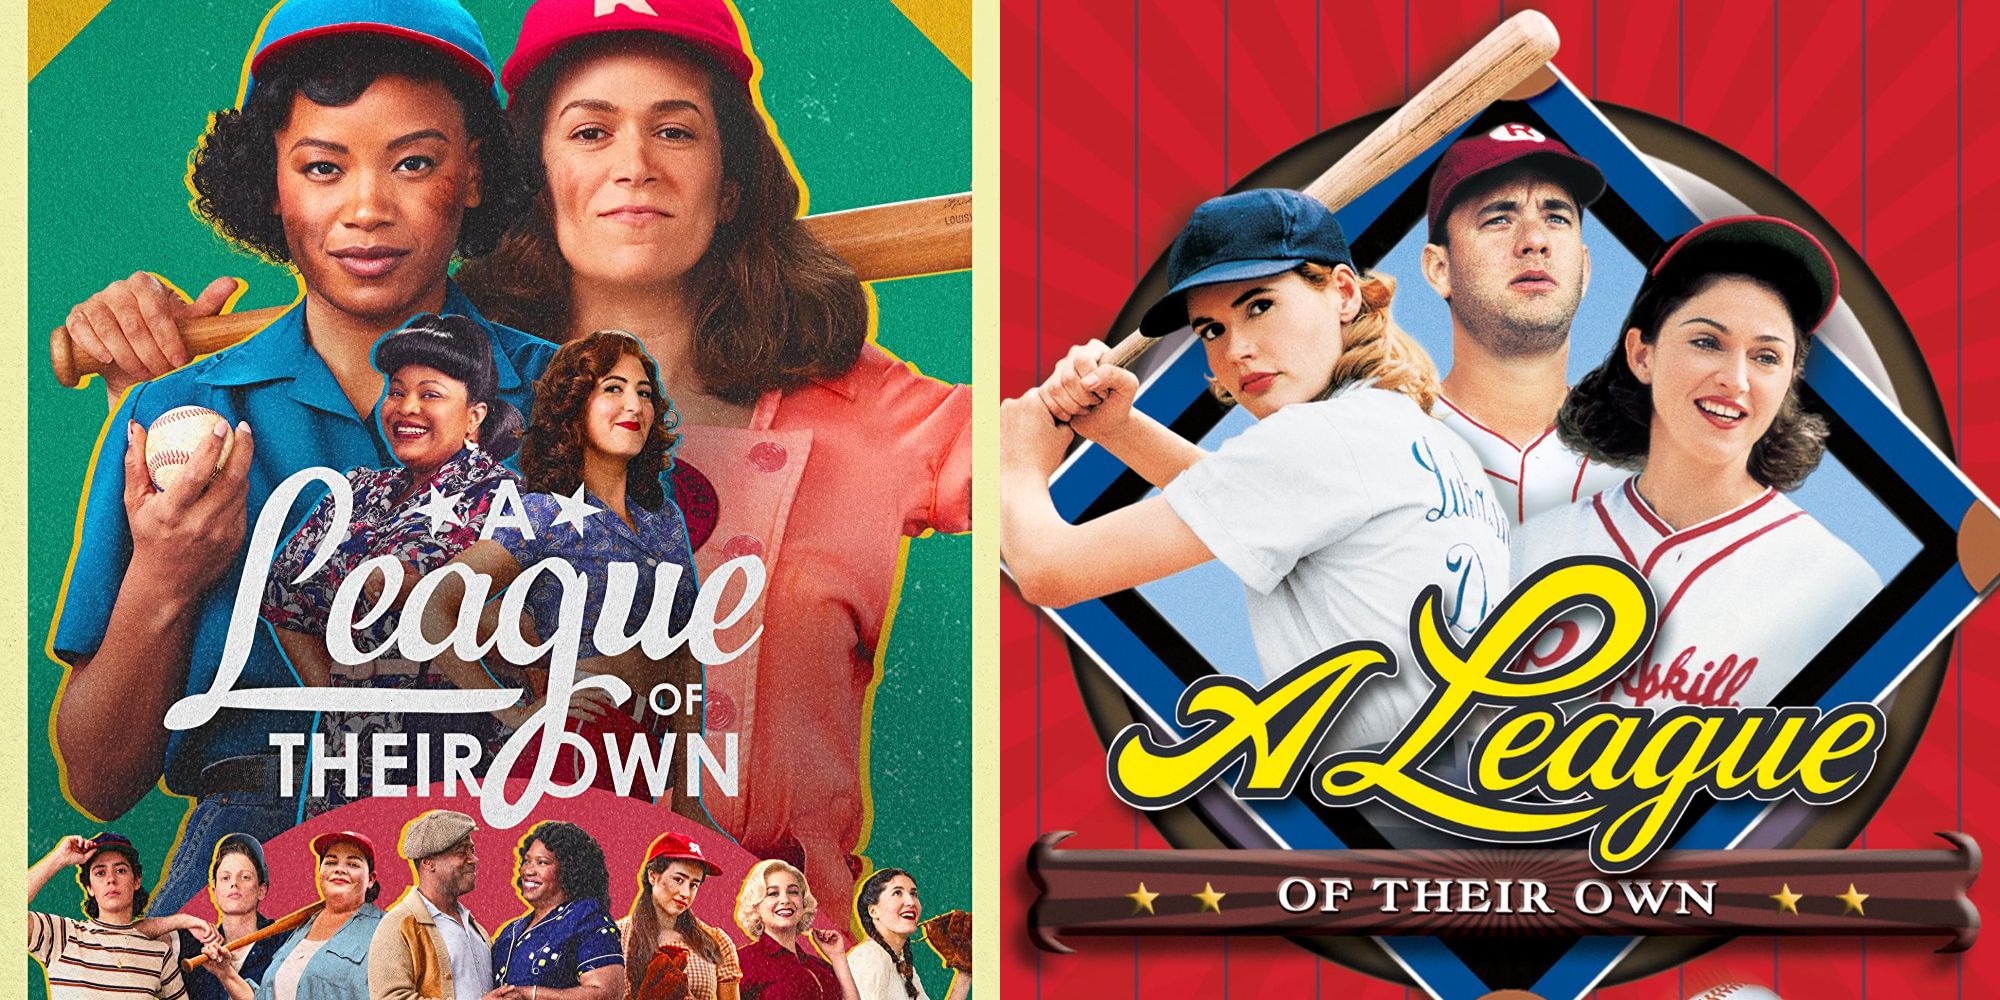 Split image showing posters for the A League of Their Own show and movie.